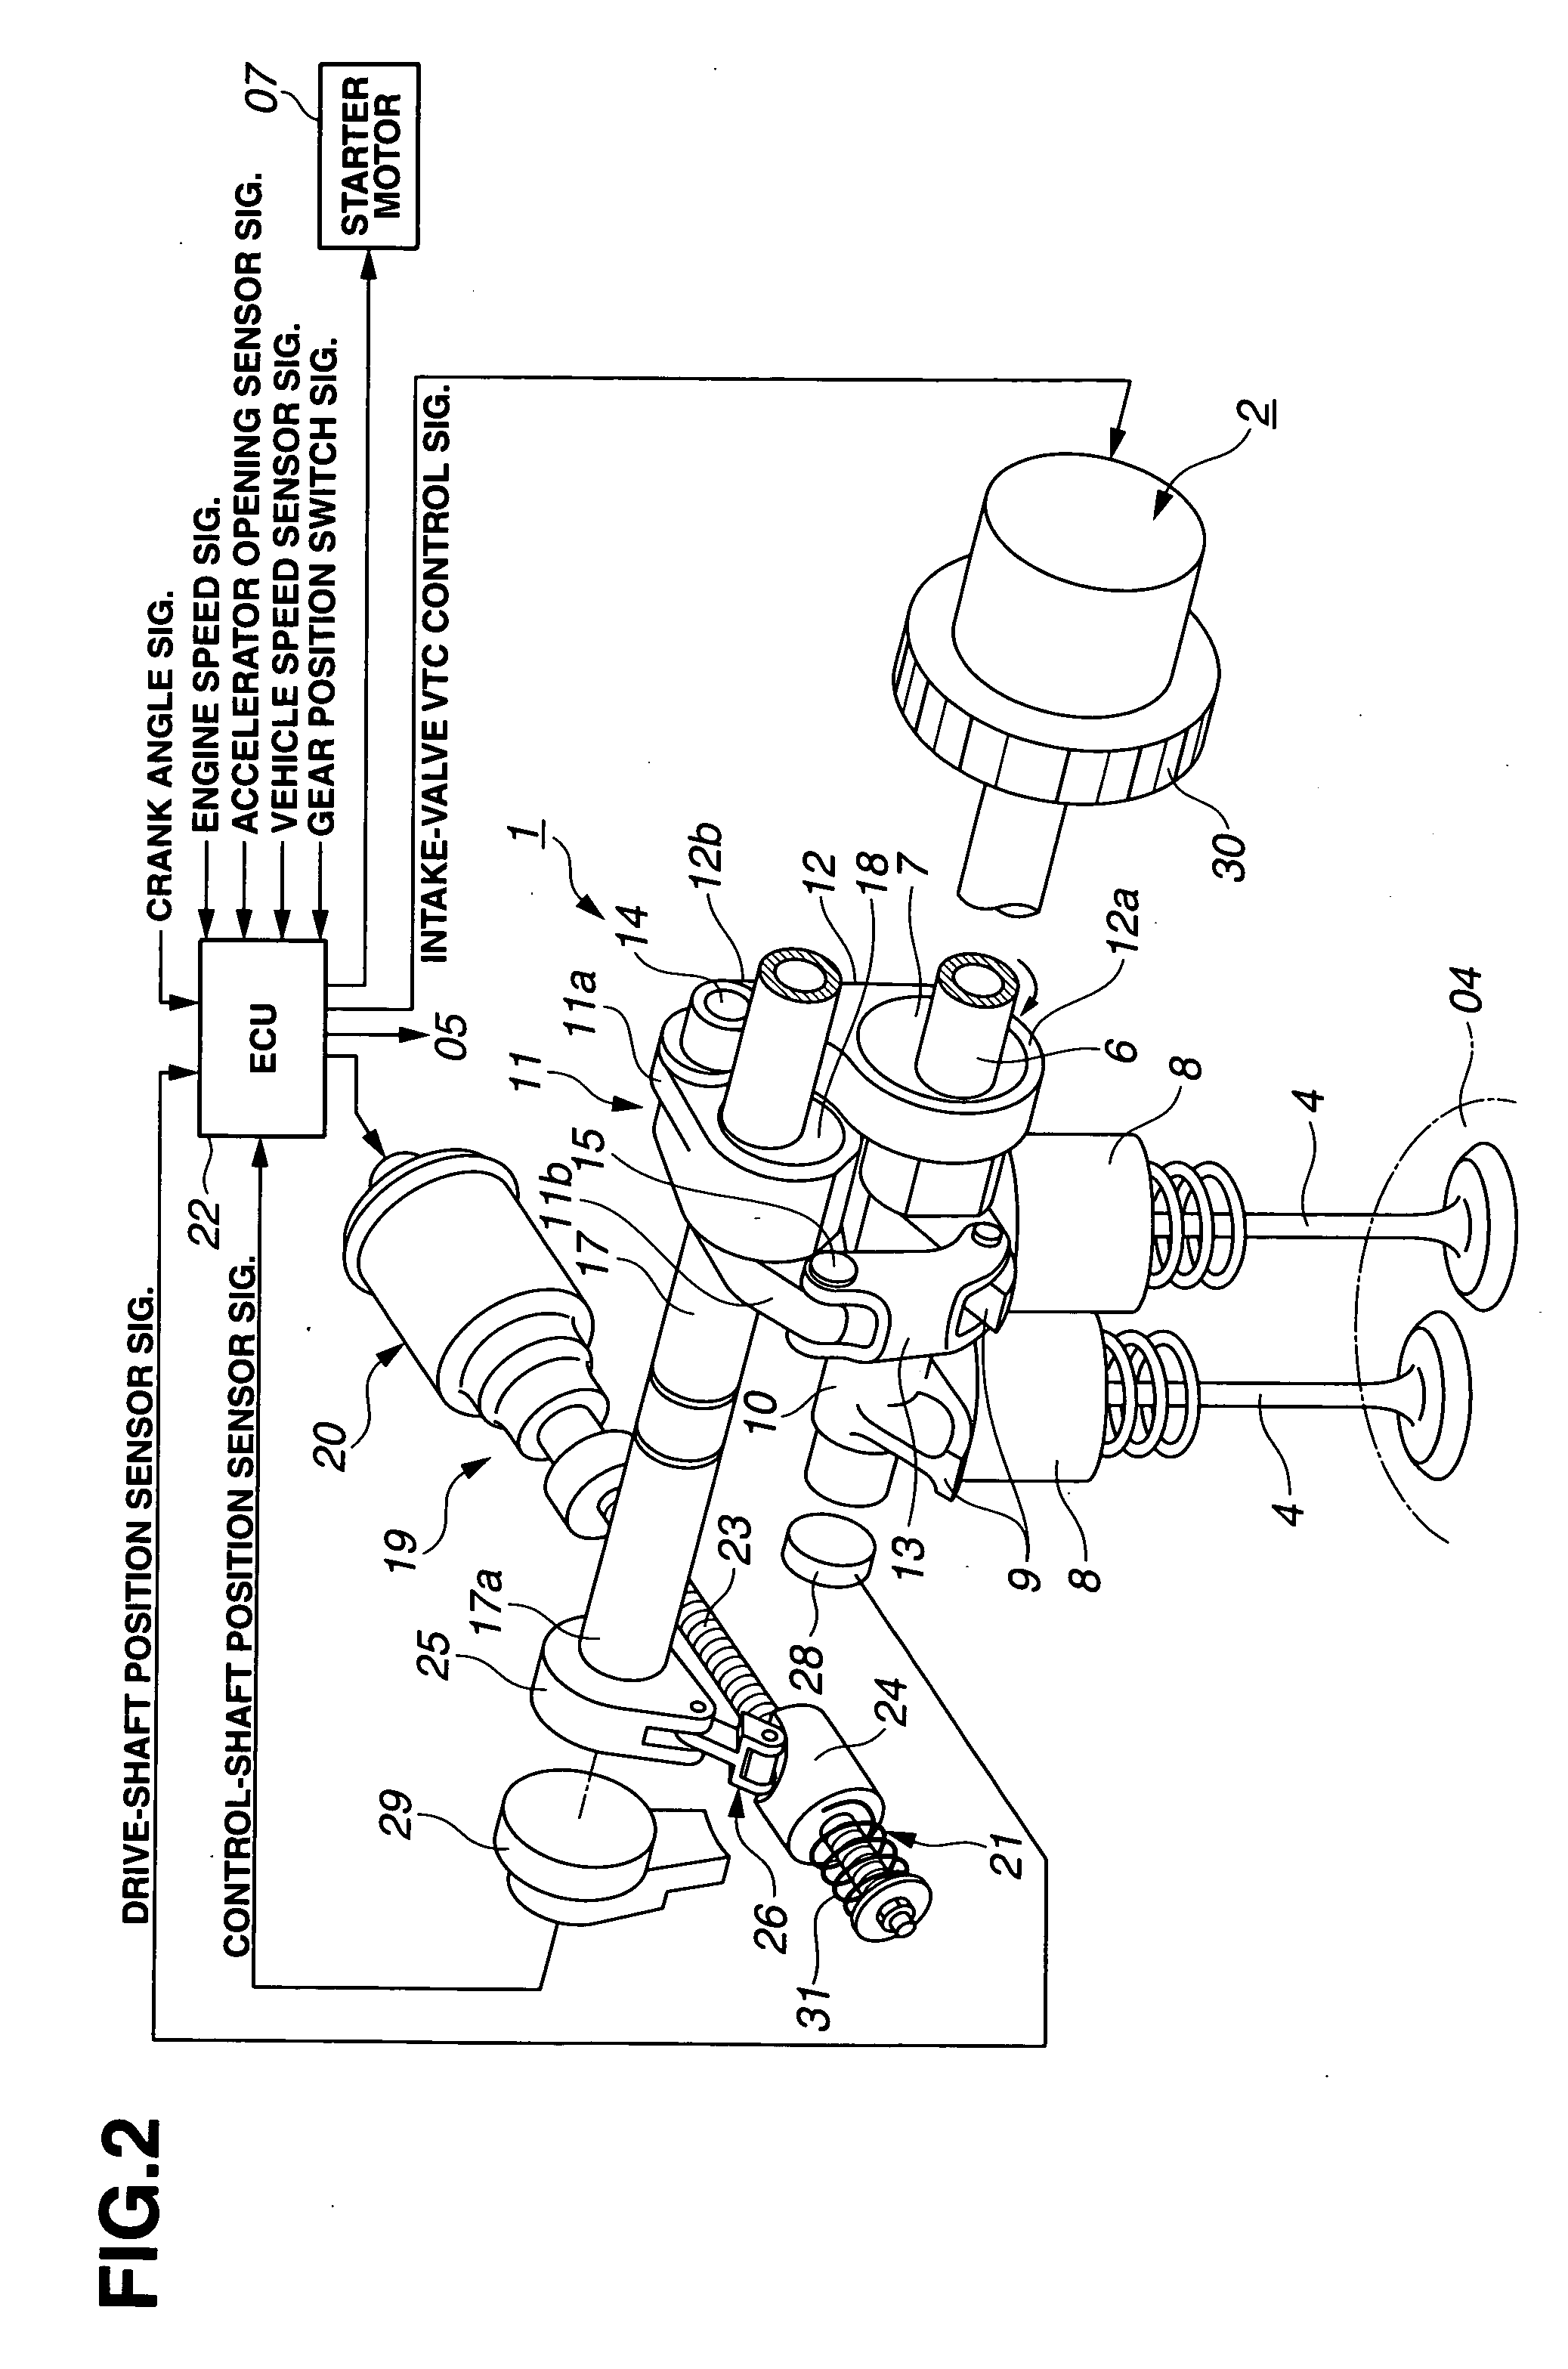 Variable valve actuation system of internal combustion engine